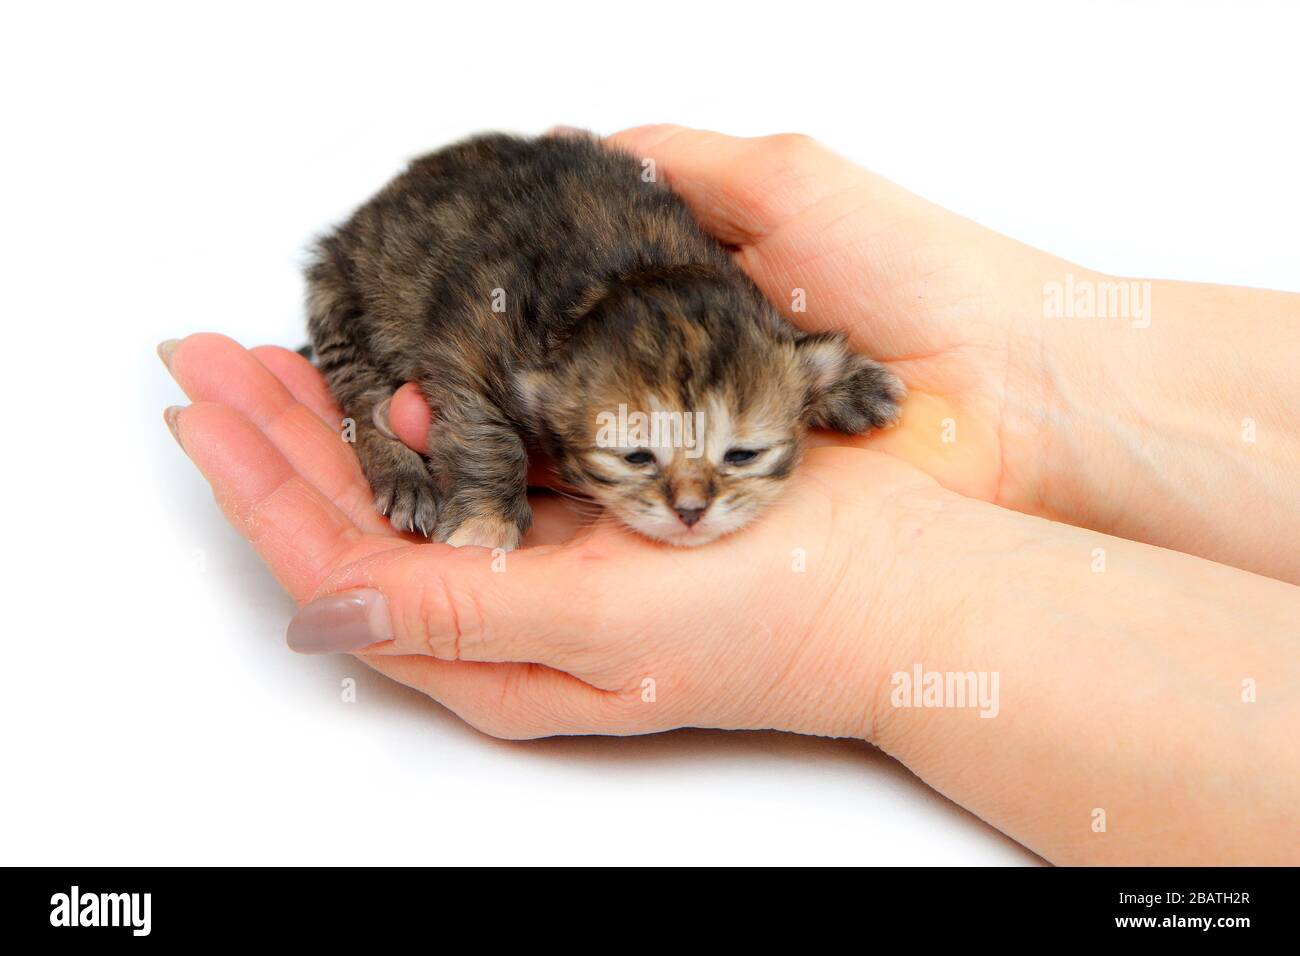 The cute small newborn kitten held in hands as a symbol of care for new life. Isolated on white background. Stock Photo